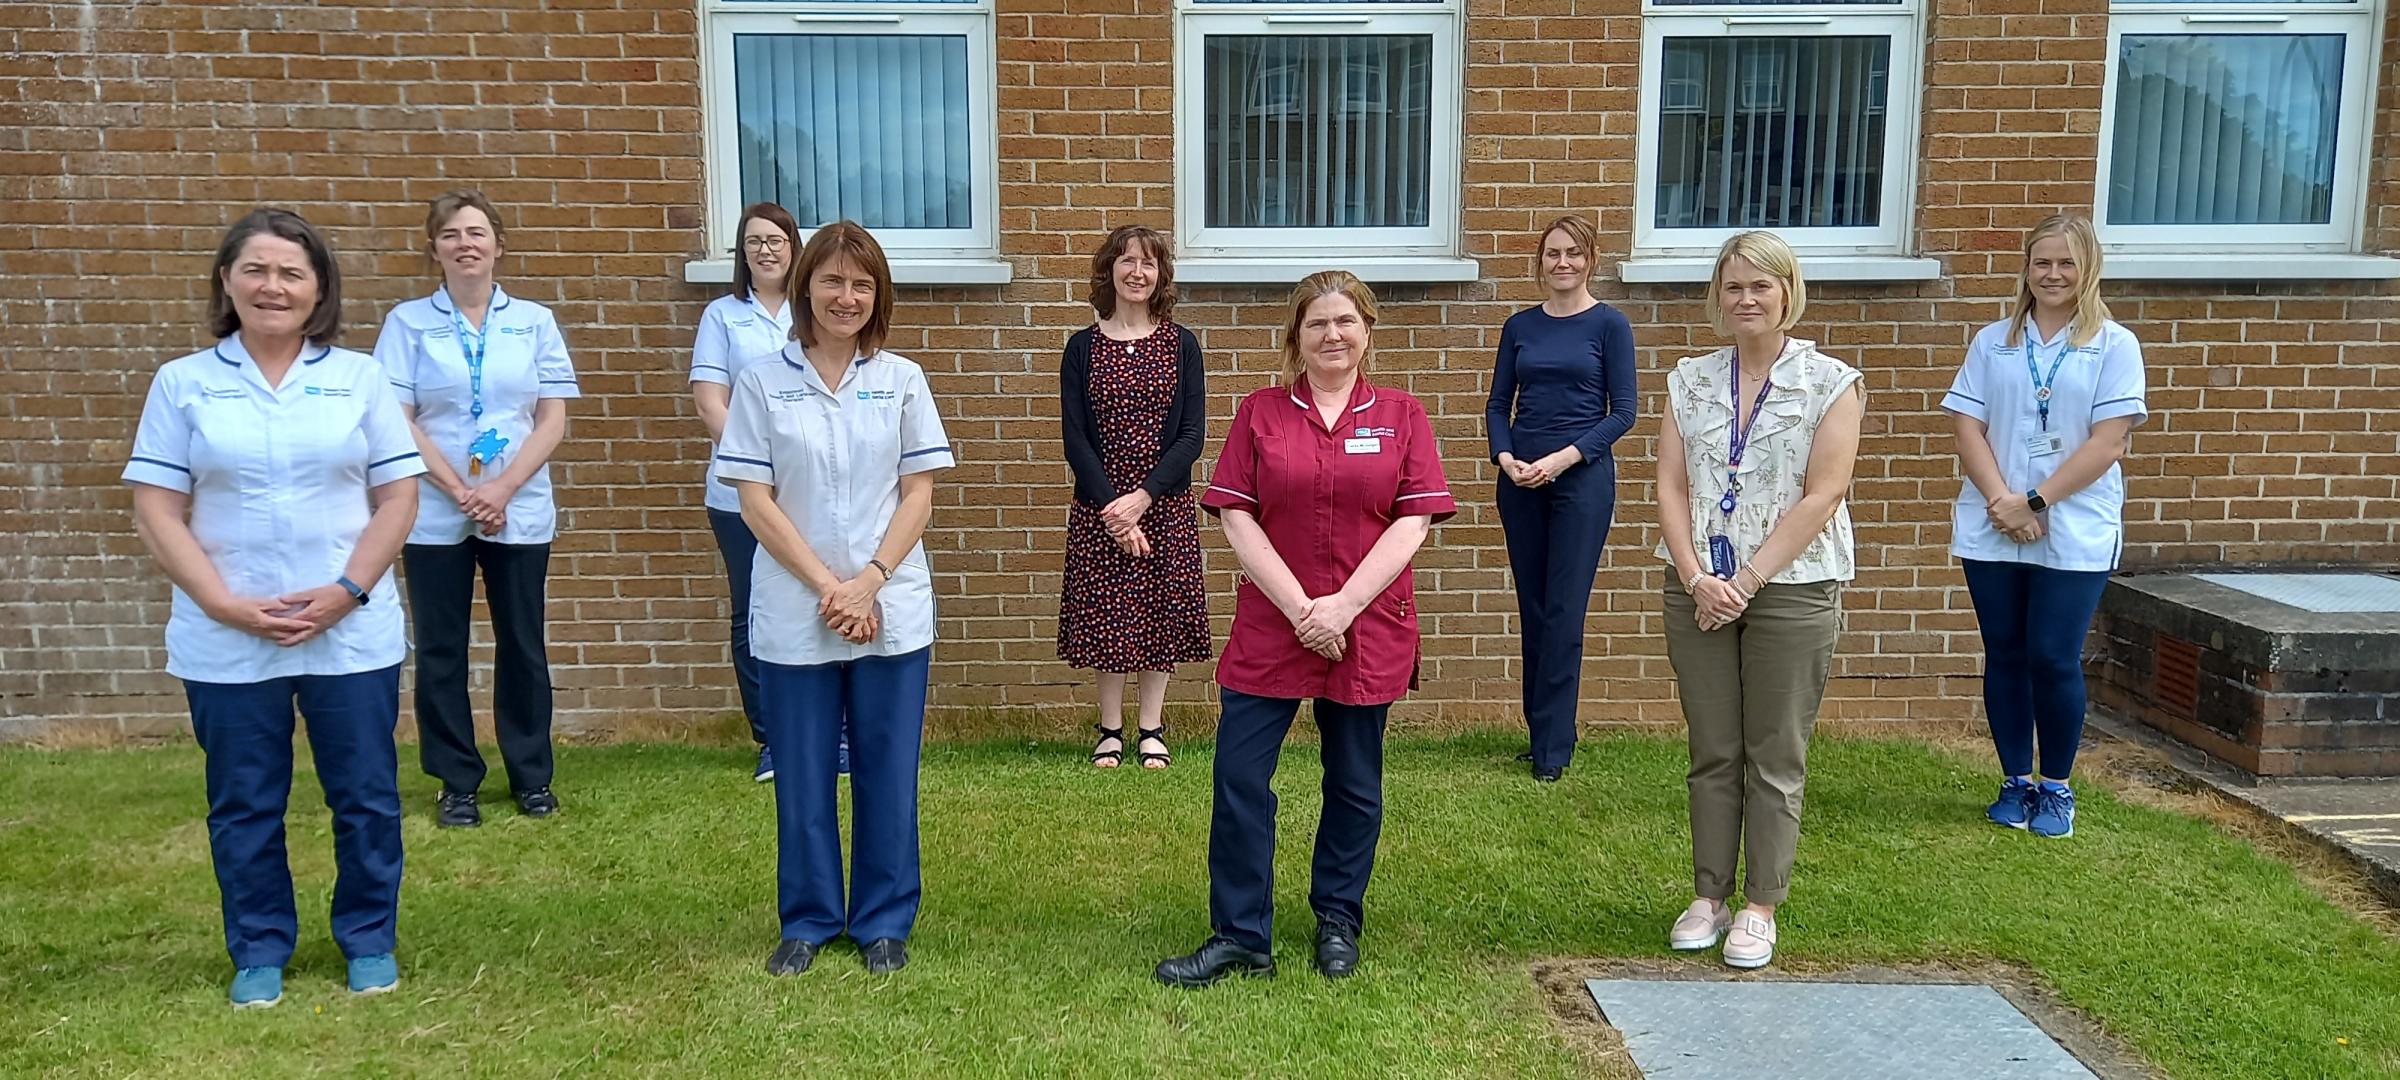 The Western Trust post COVID-19 syndrome assessment and treatment team